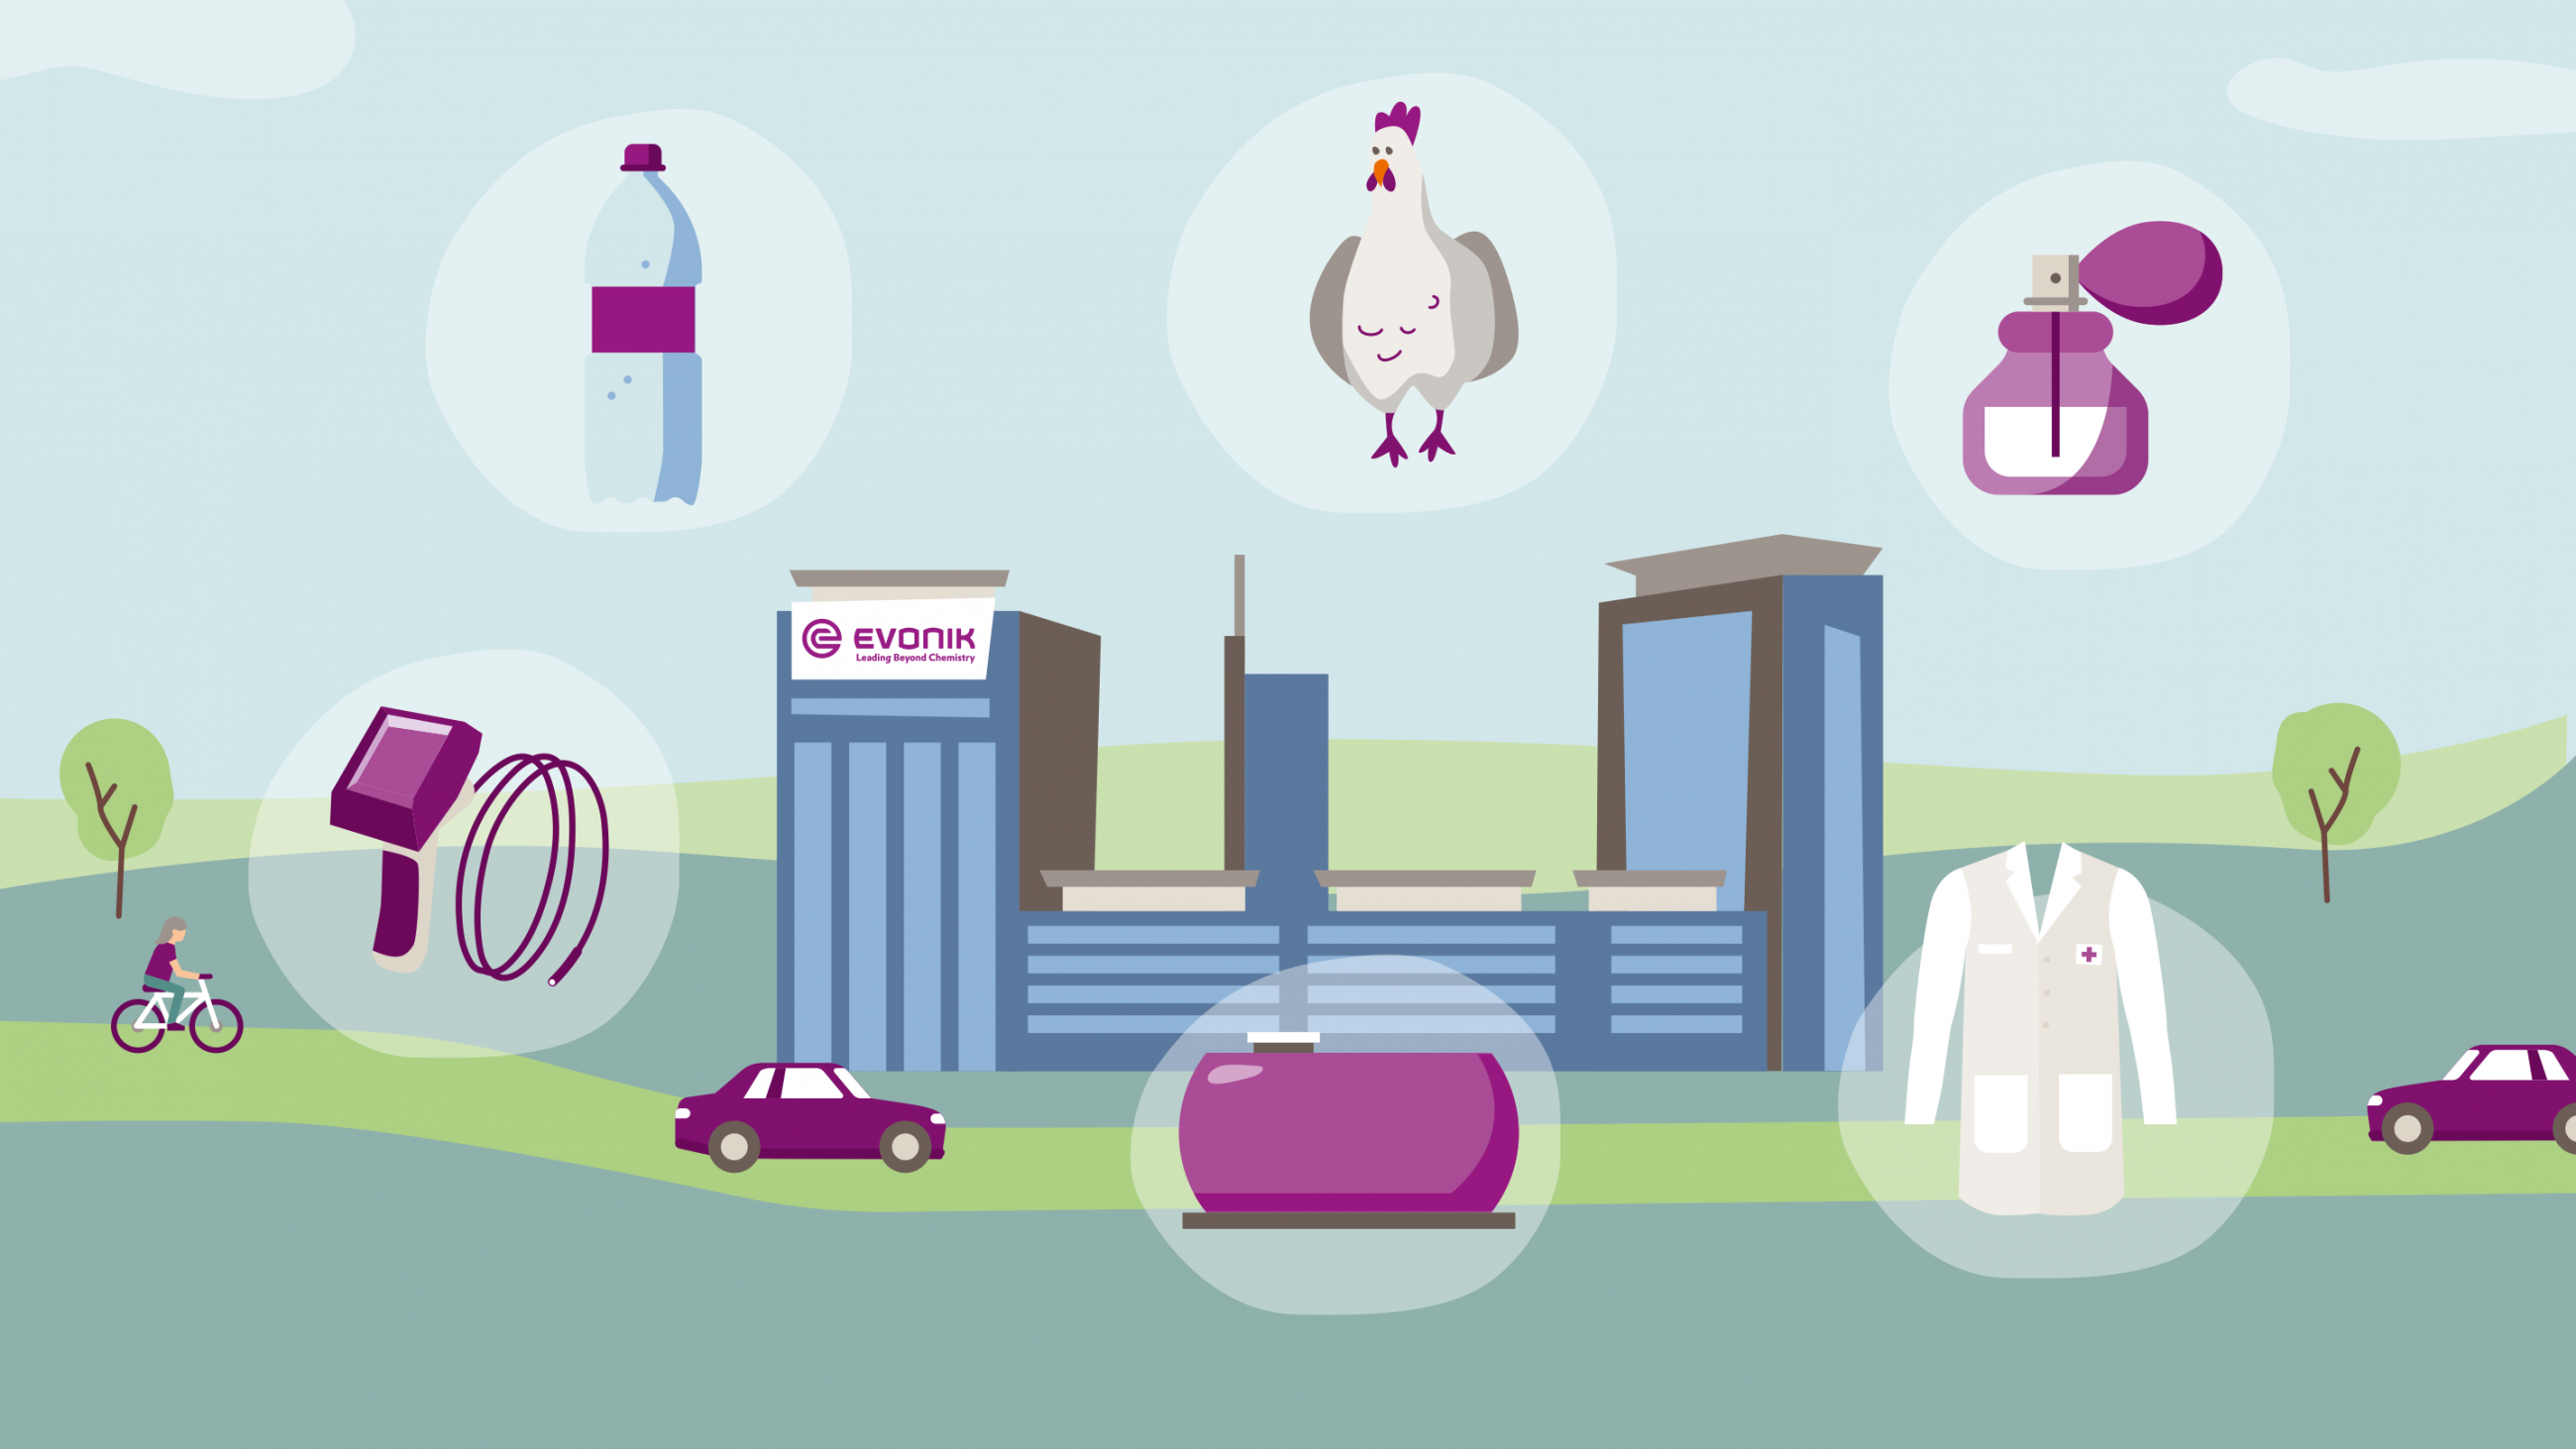 Evonik Active Oxygens produces peracetic acid for a range of applications and industries, from aseptic packaging to poultry processing and water treatment.